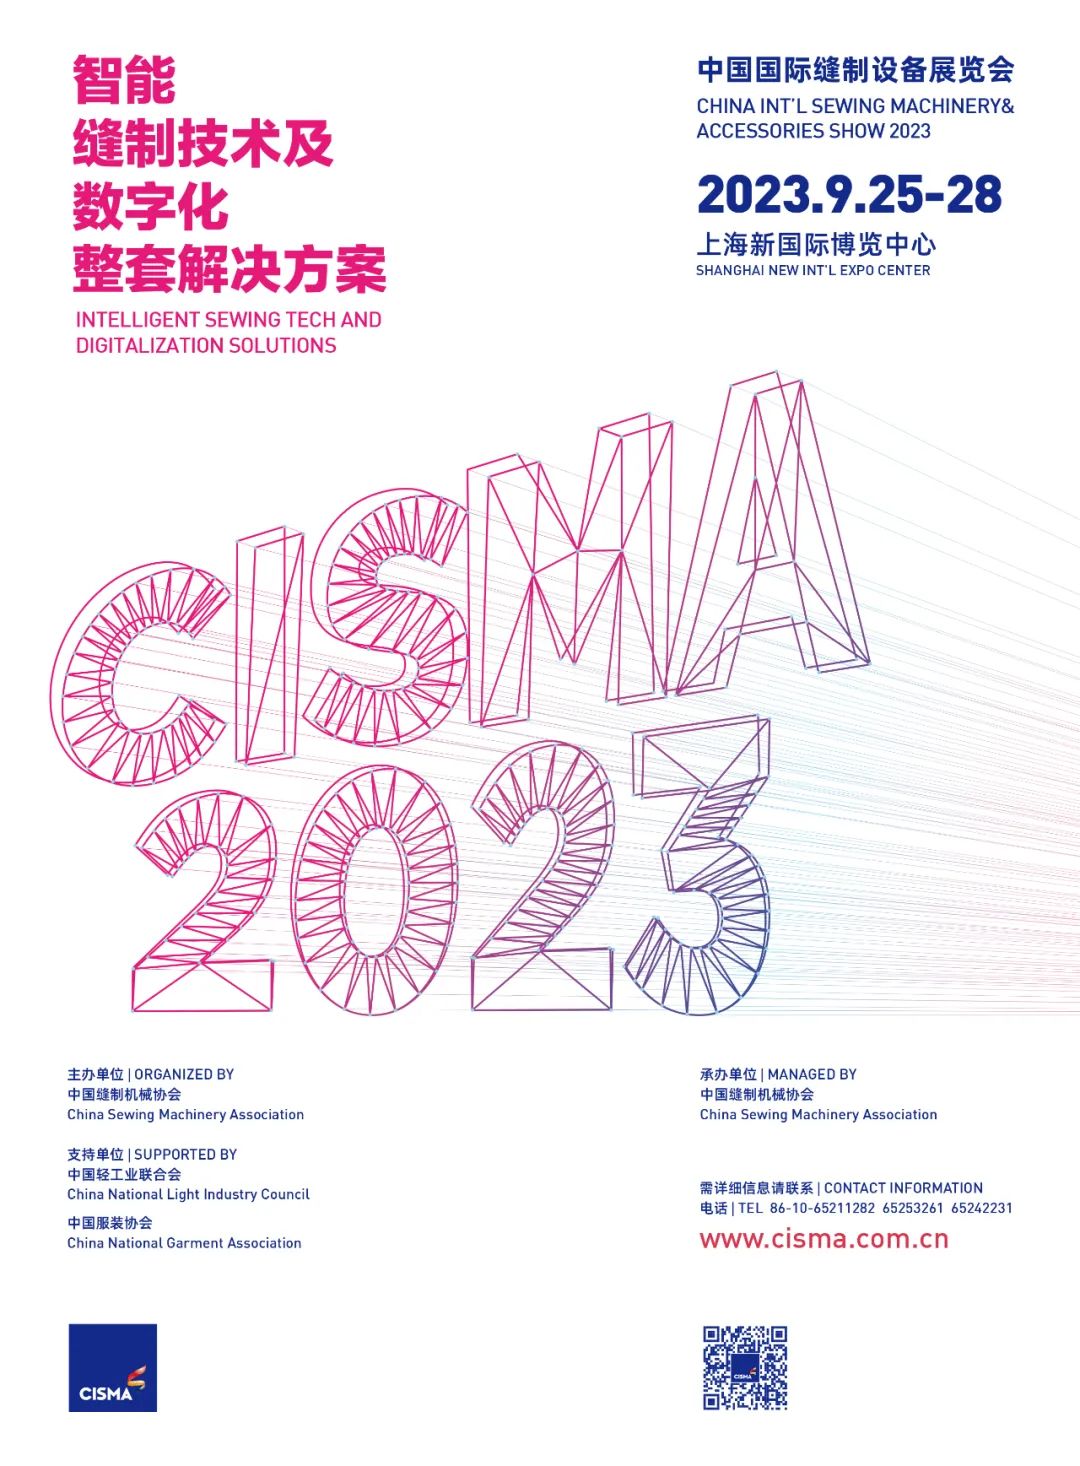 ESDA Technology participated in CISMA2023